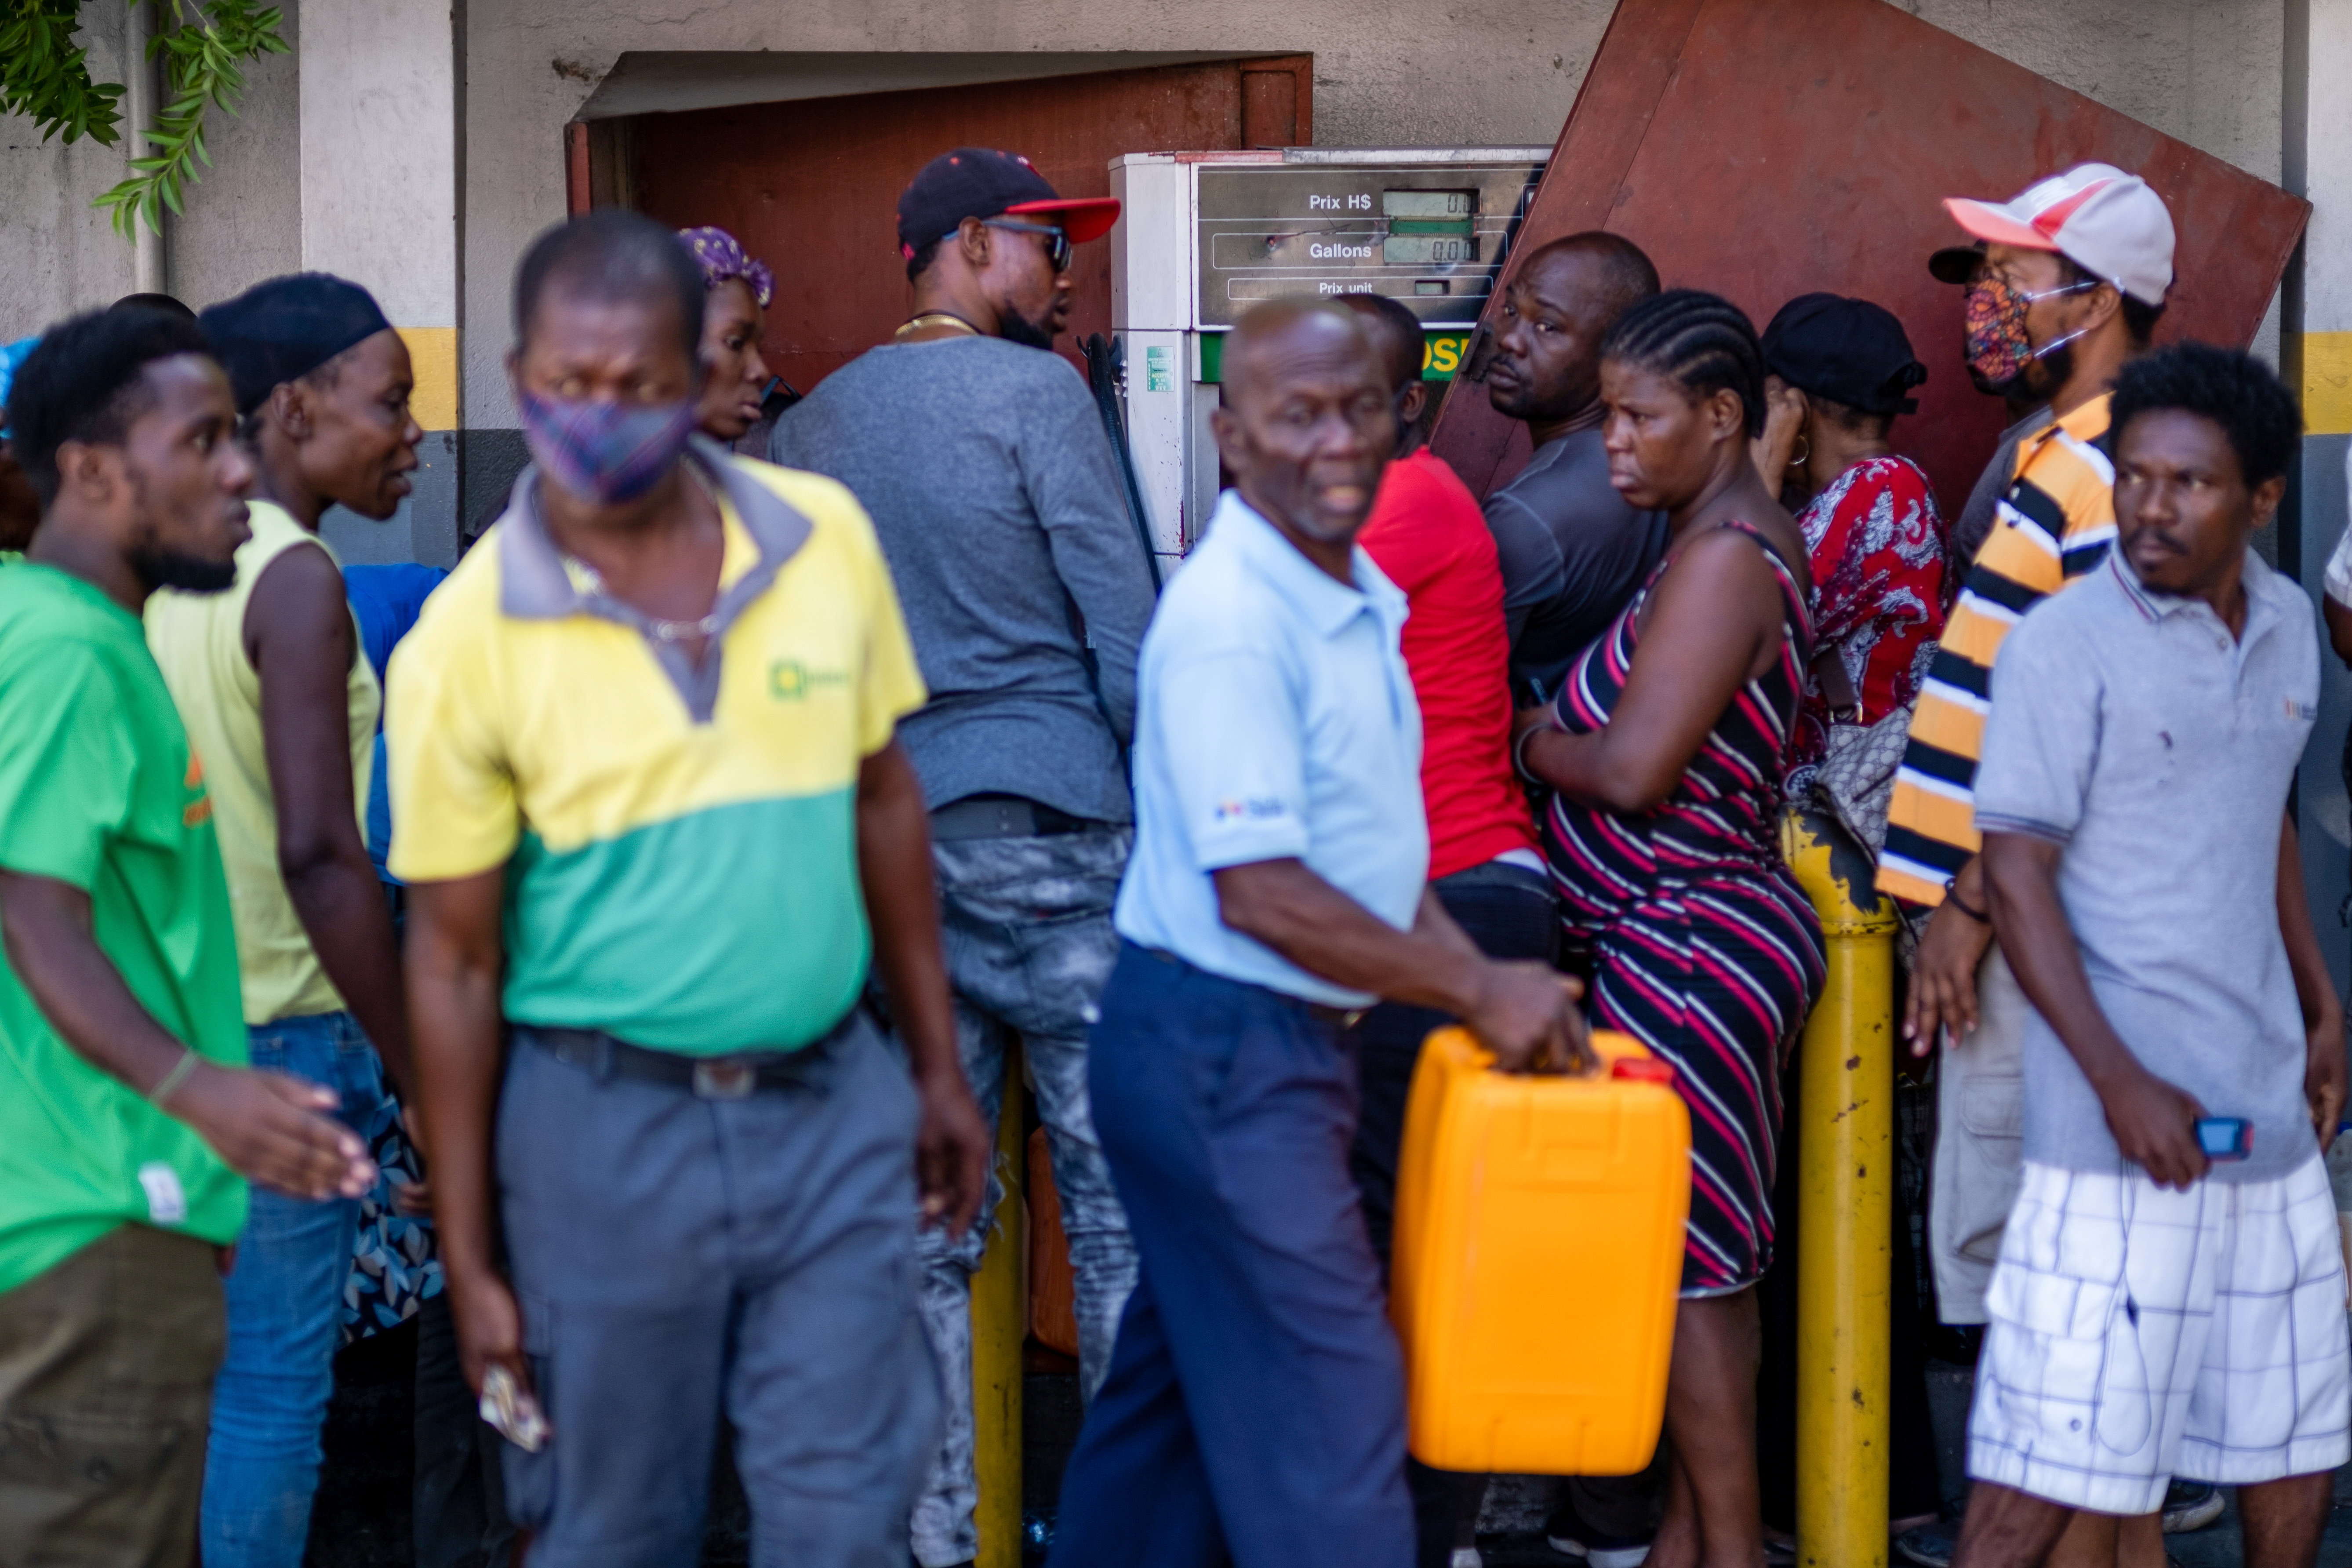 People line-up at a gasoline station to buy gas following the assassination of President Jovenel Moise, in Port-au-Prince